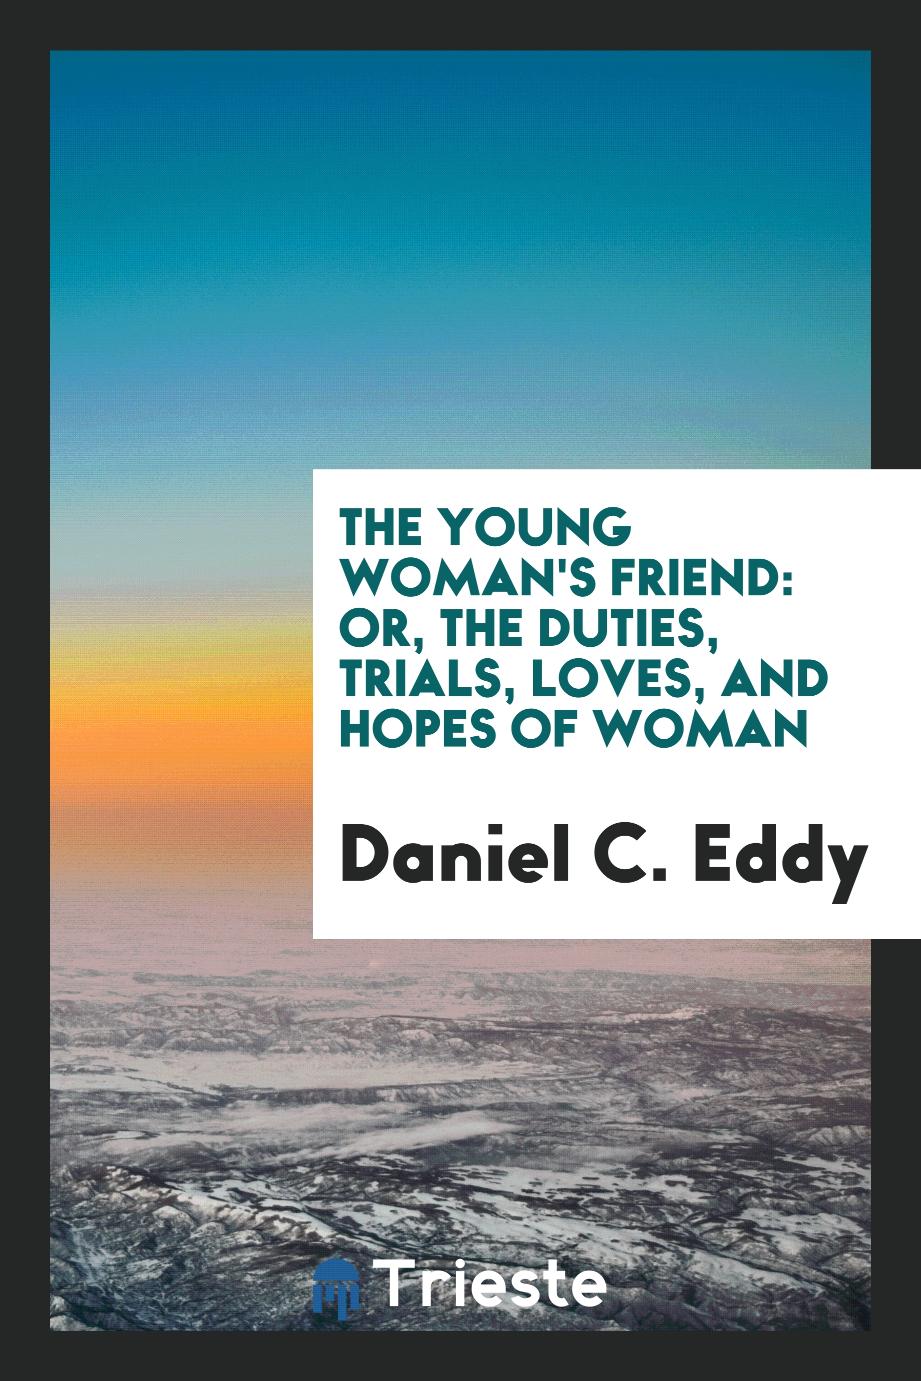 The Young Woman's Friend: Or, The Duties, Trials, Loves, and Hopes of Woman